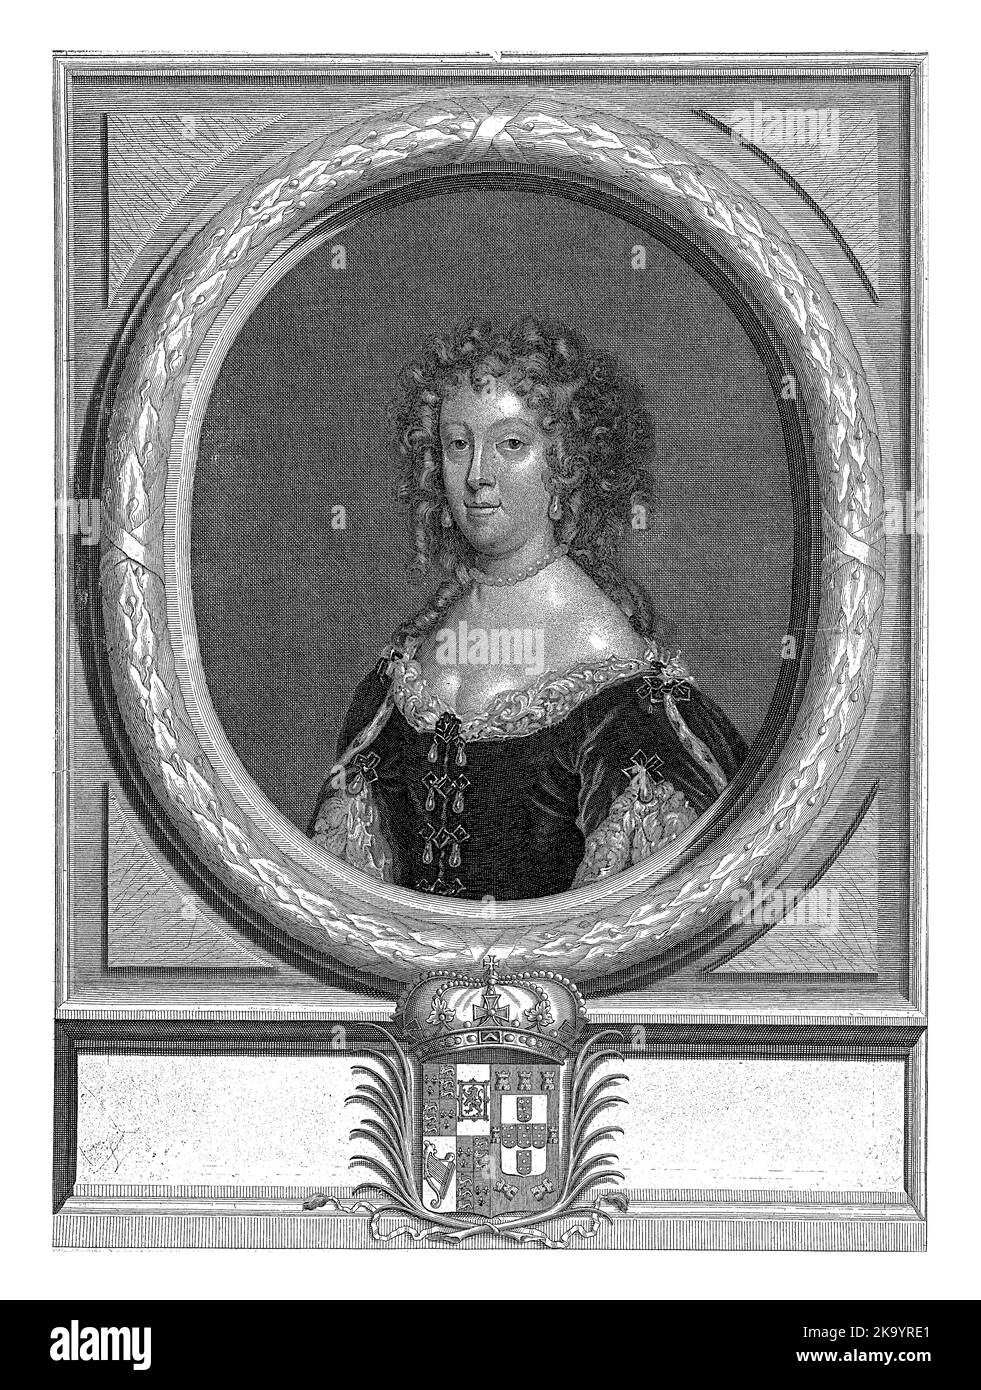 Portrait of Catherine of Braganza, Queen of England, in oval frame in the shape of a laurel wreath. Stock Photo